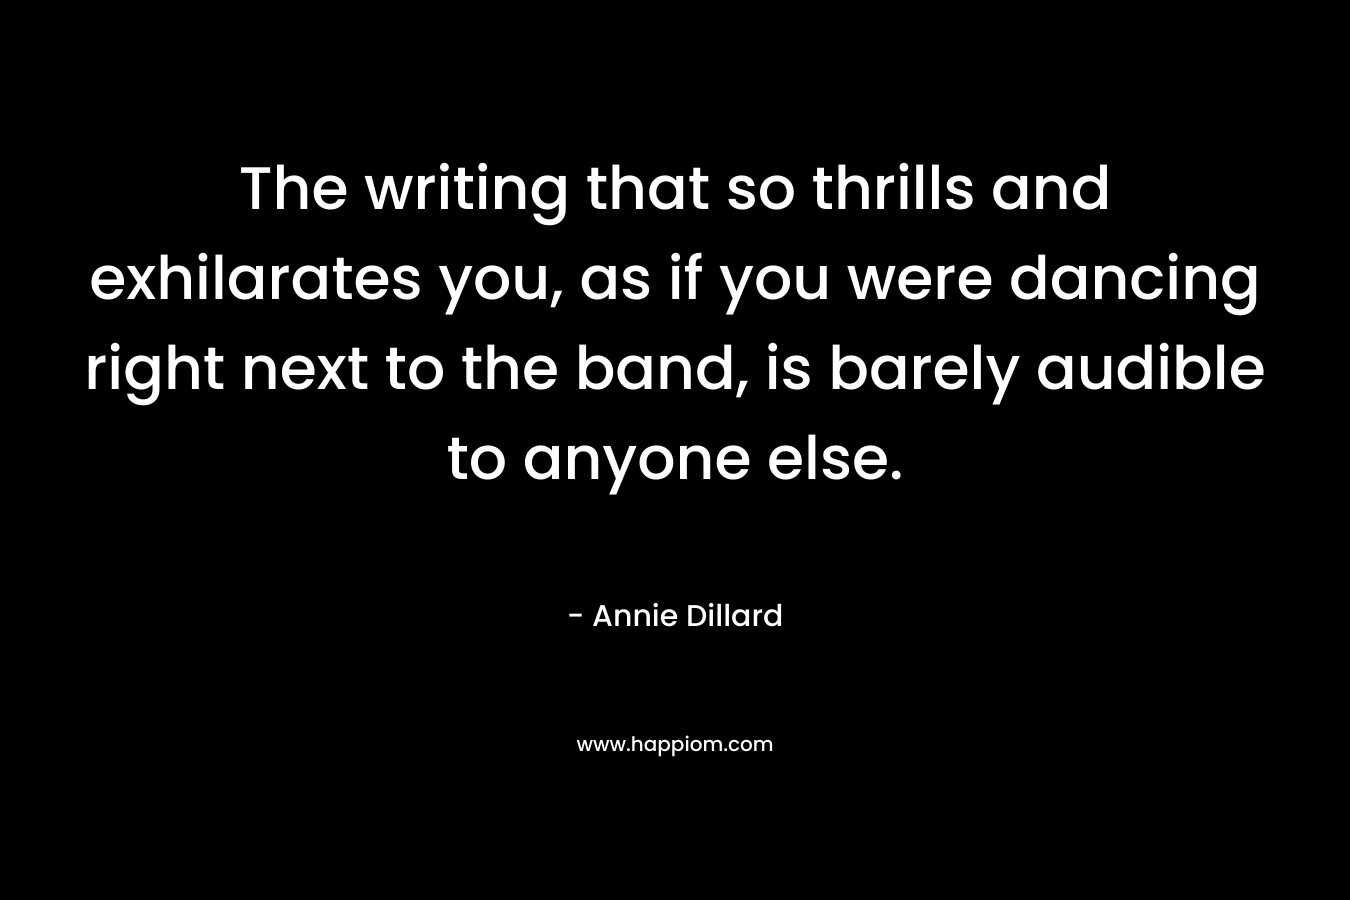 The writing that so thrills and exhilarates you, as if you were dancing right next to the band, is barely audible to anyone else. – Annie Dillard